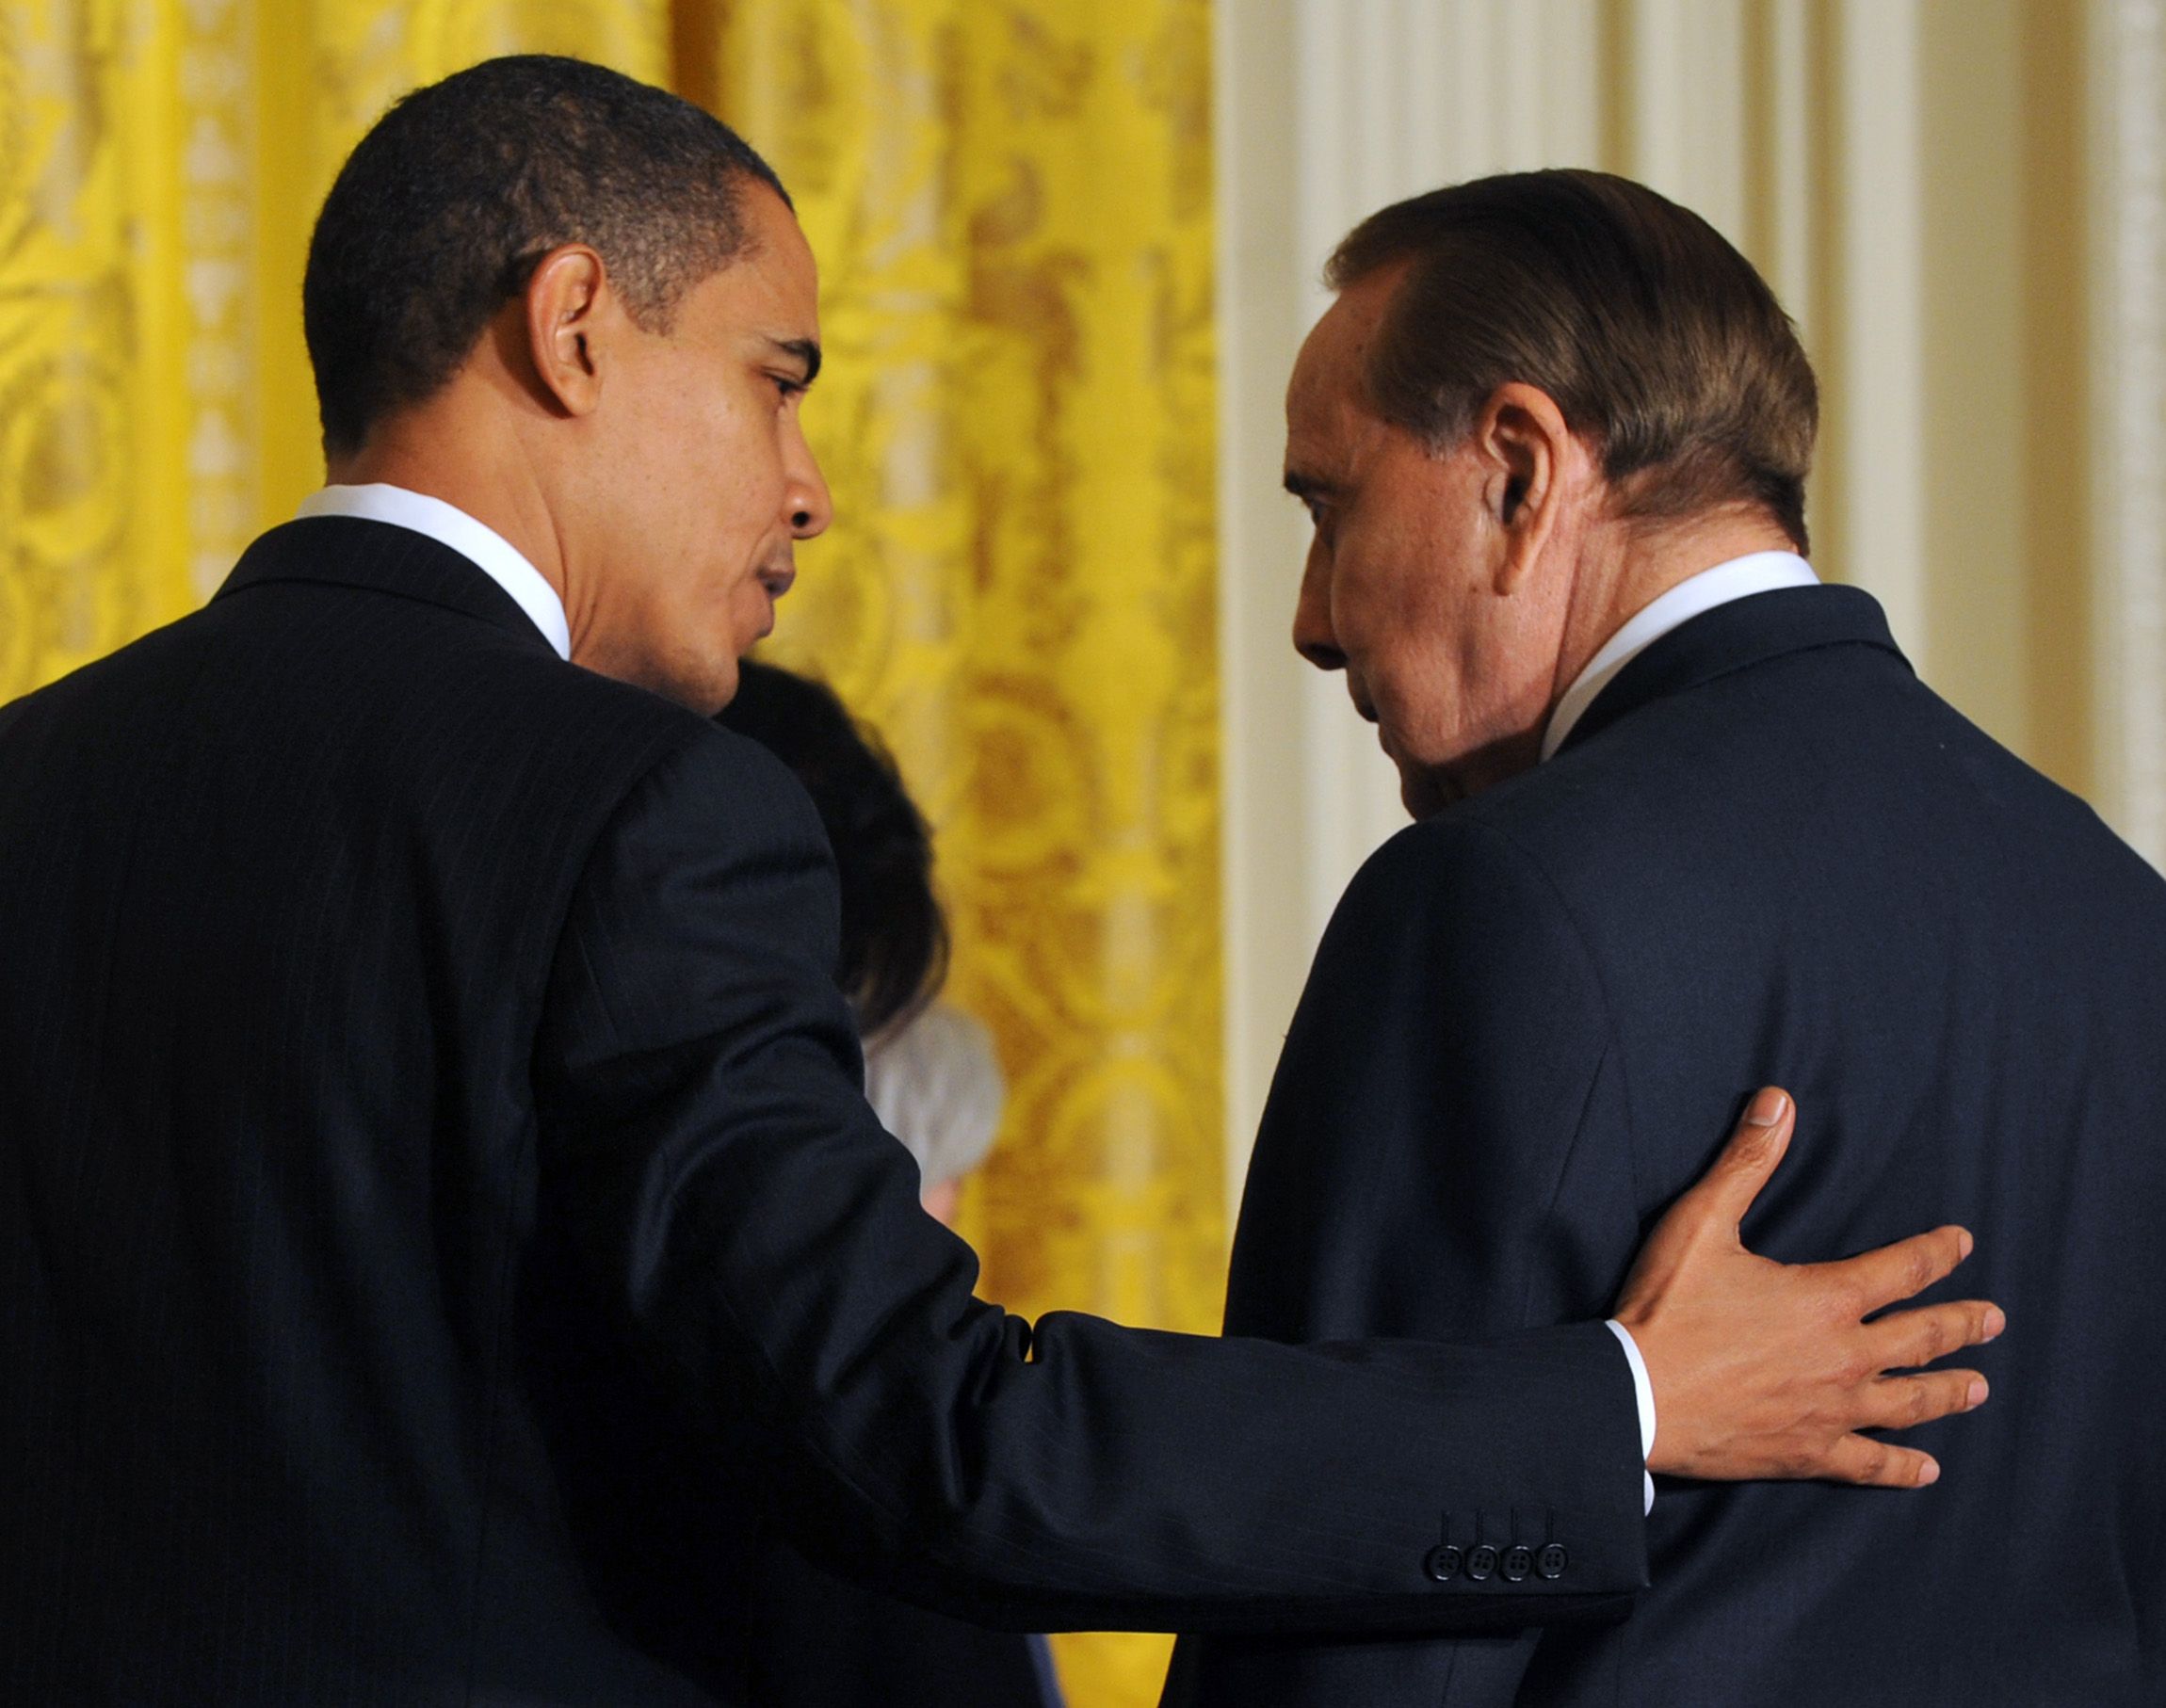 Obama chats with Dole